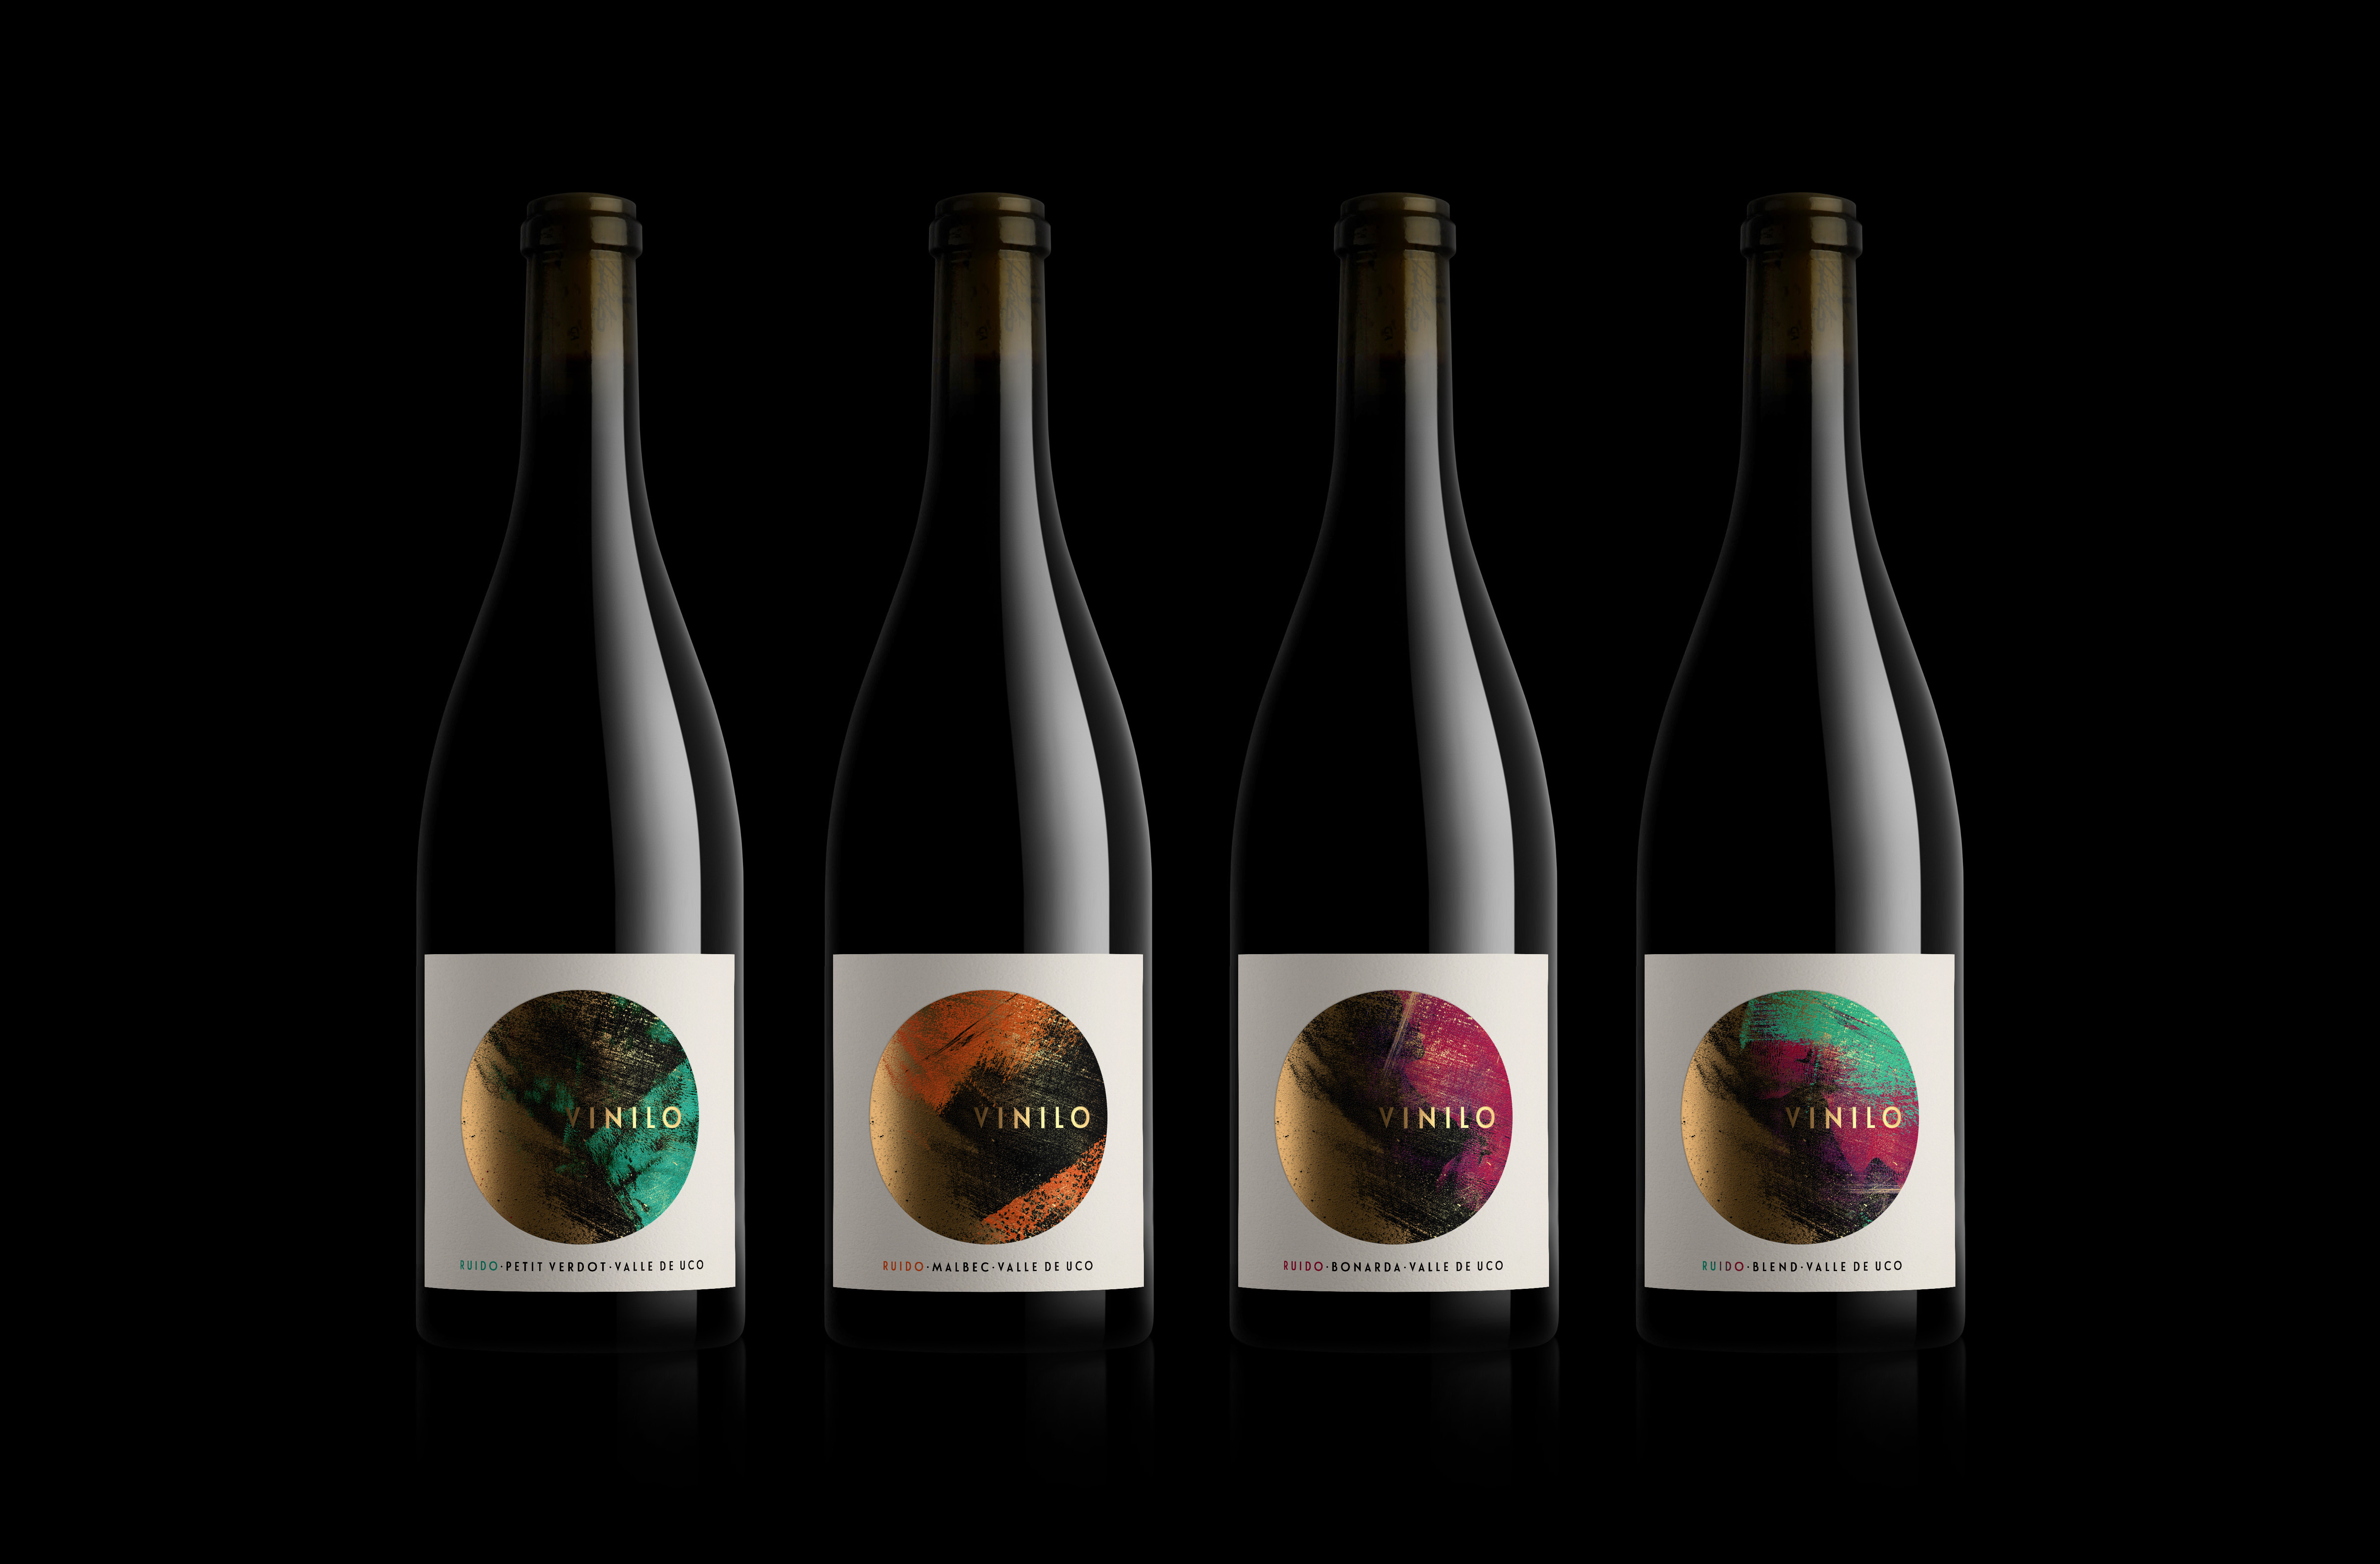 Vinilo Wines by Oveja & Remi